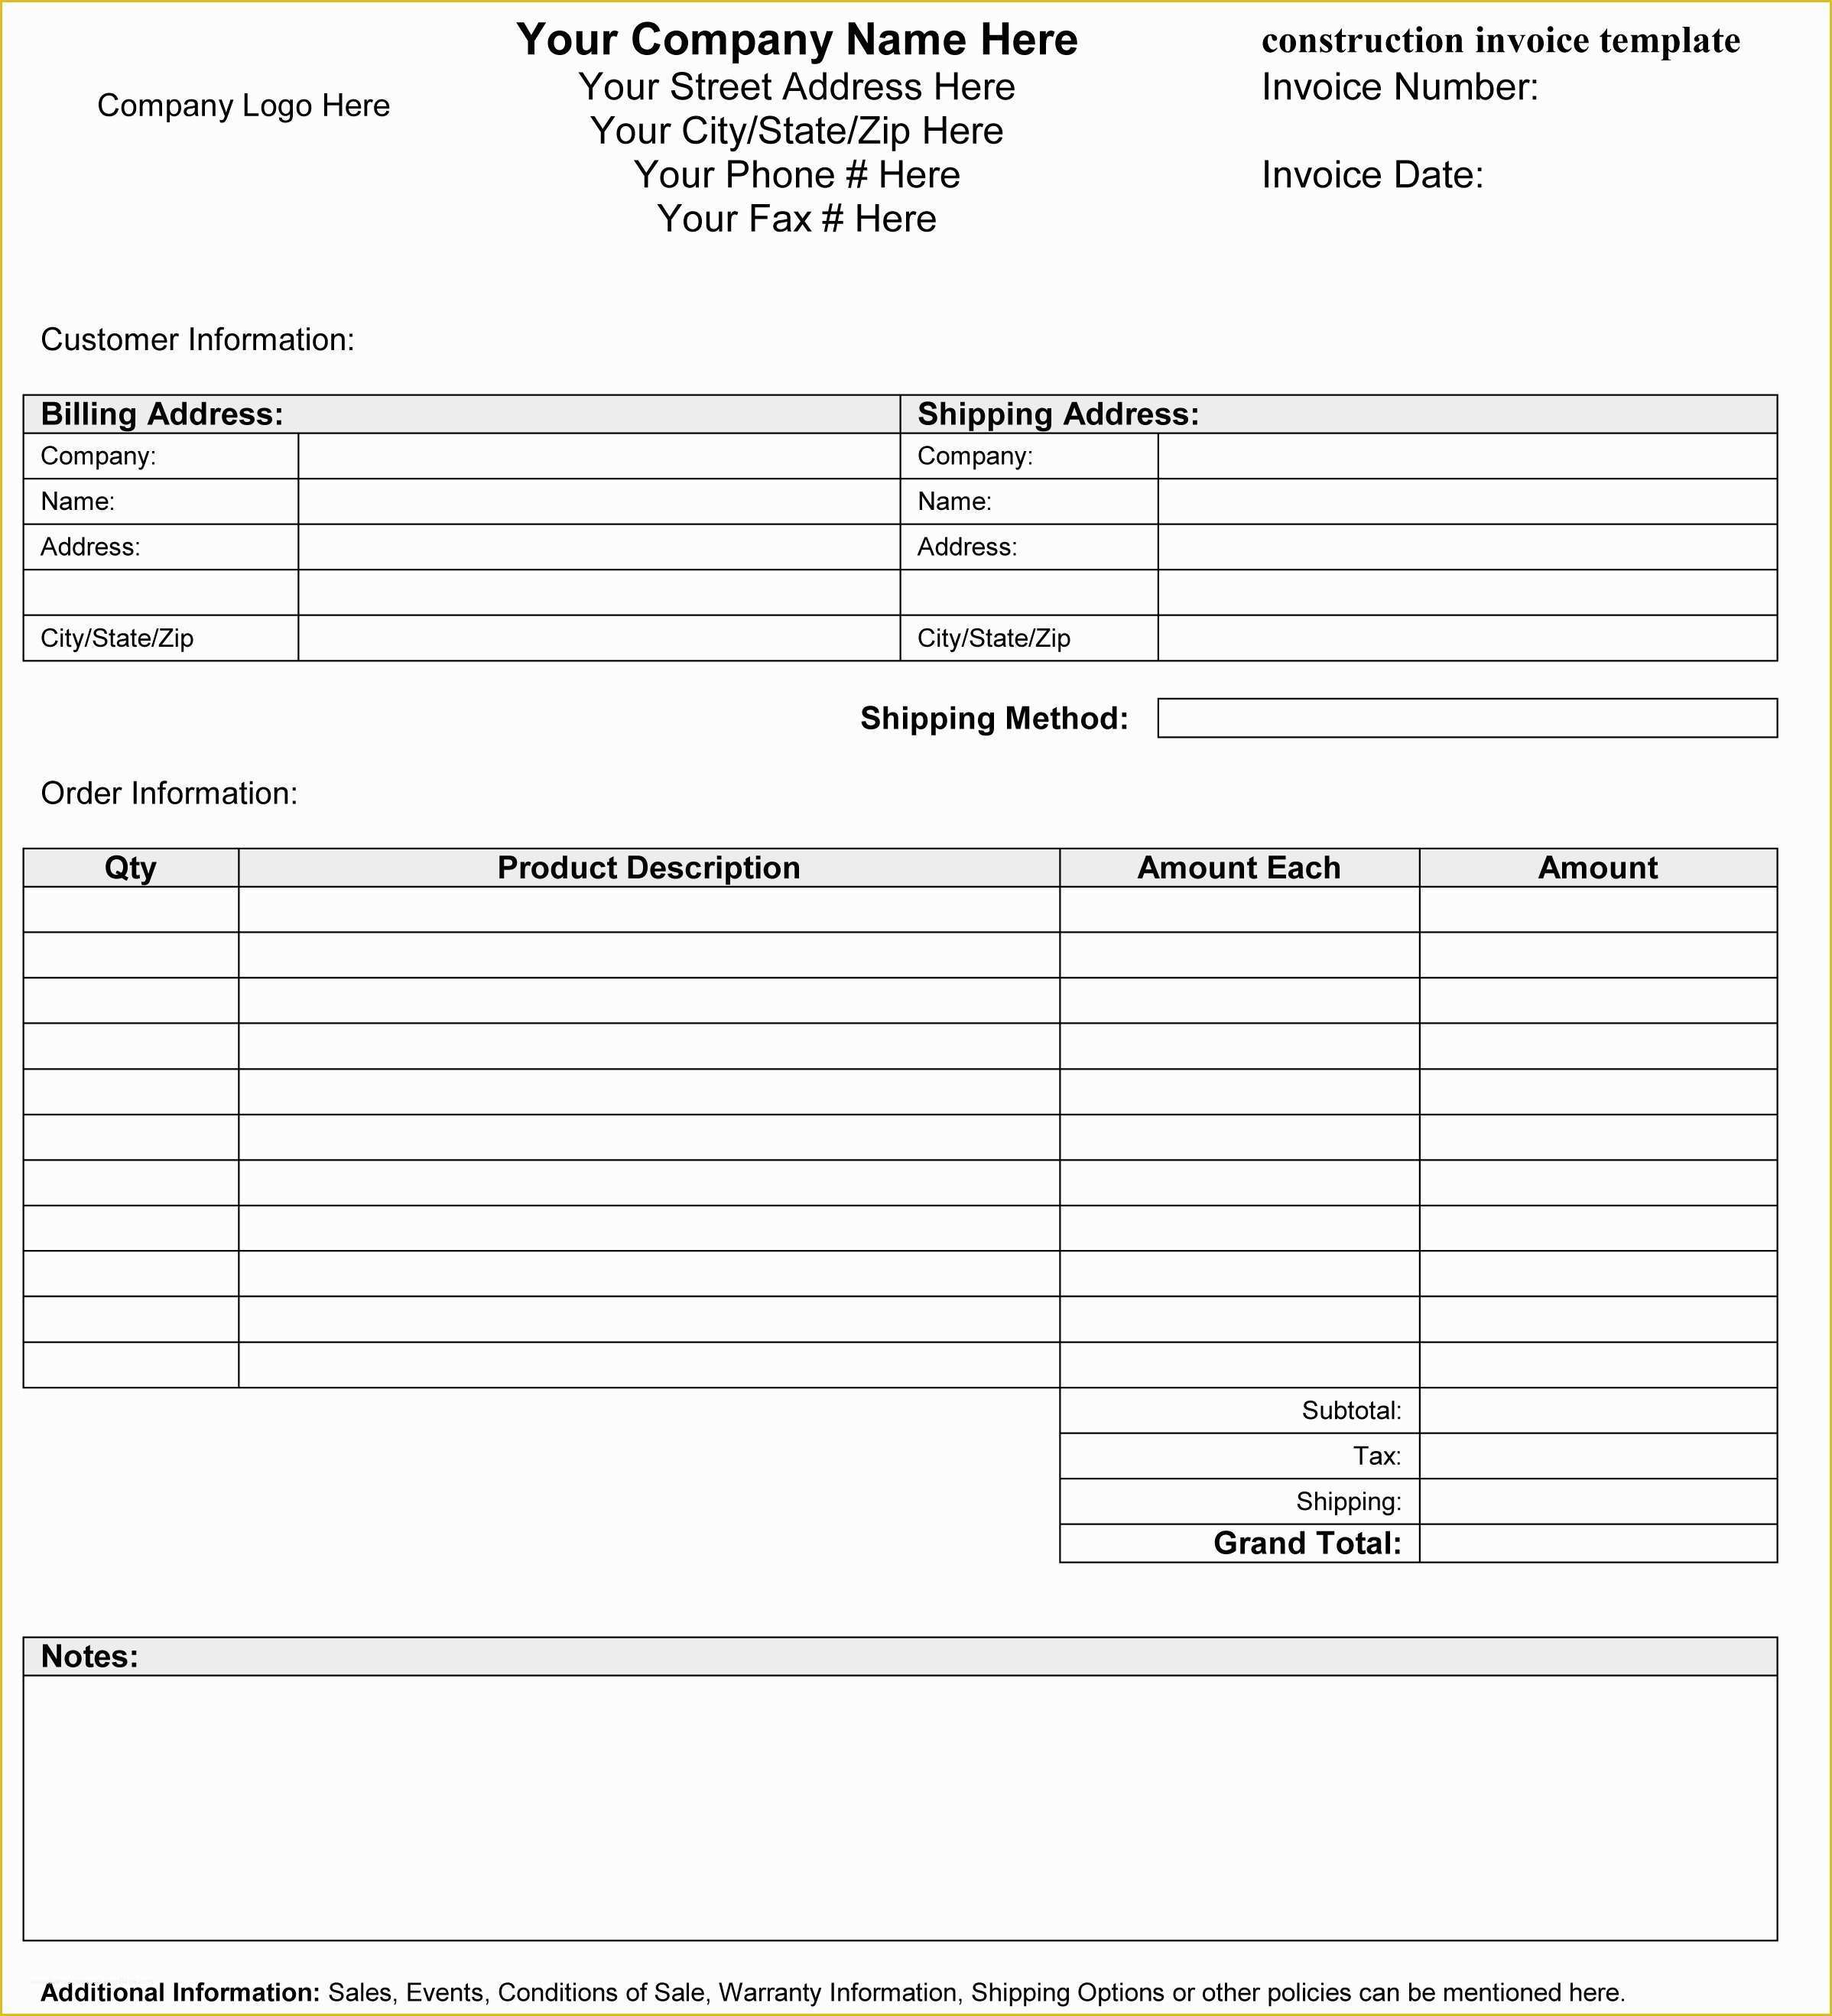 Free Construction Contract Template Word Of Construction Invoice Template